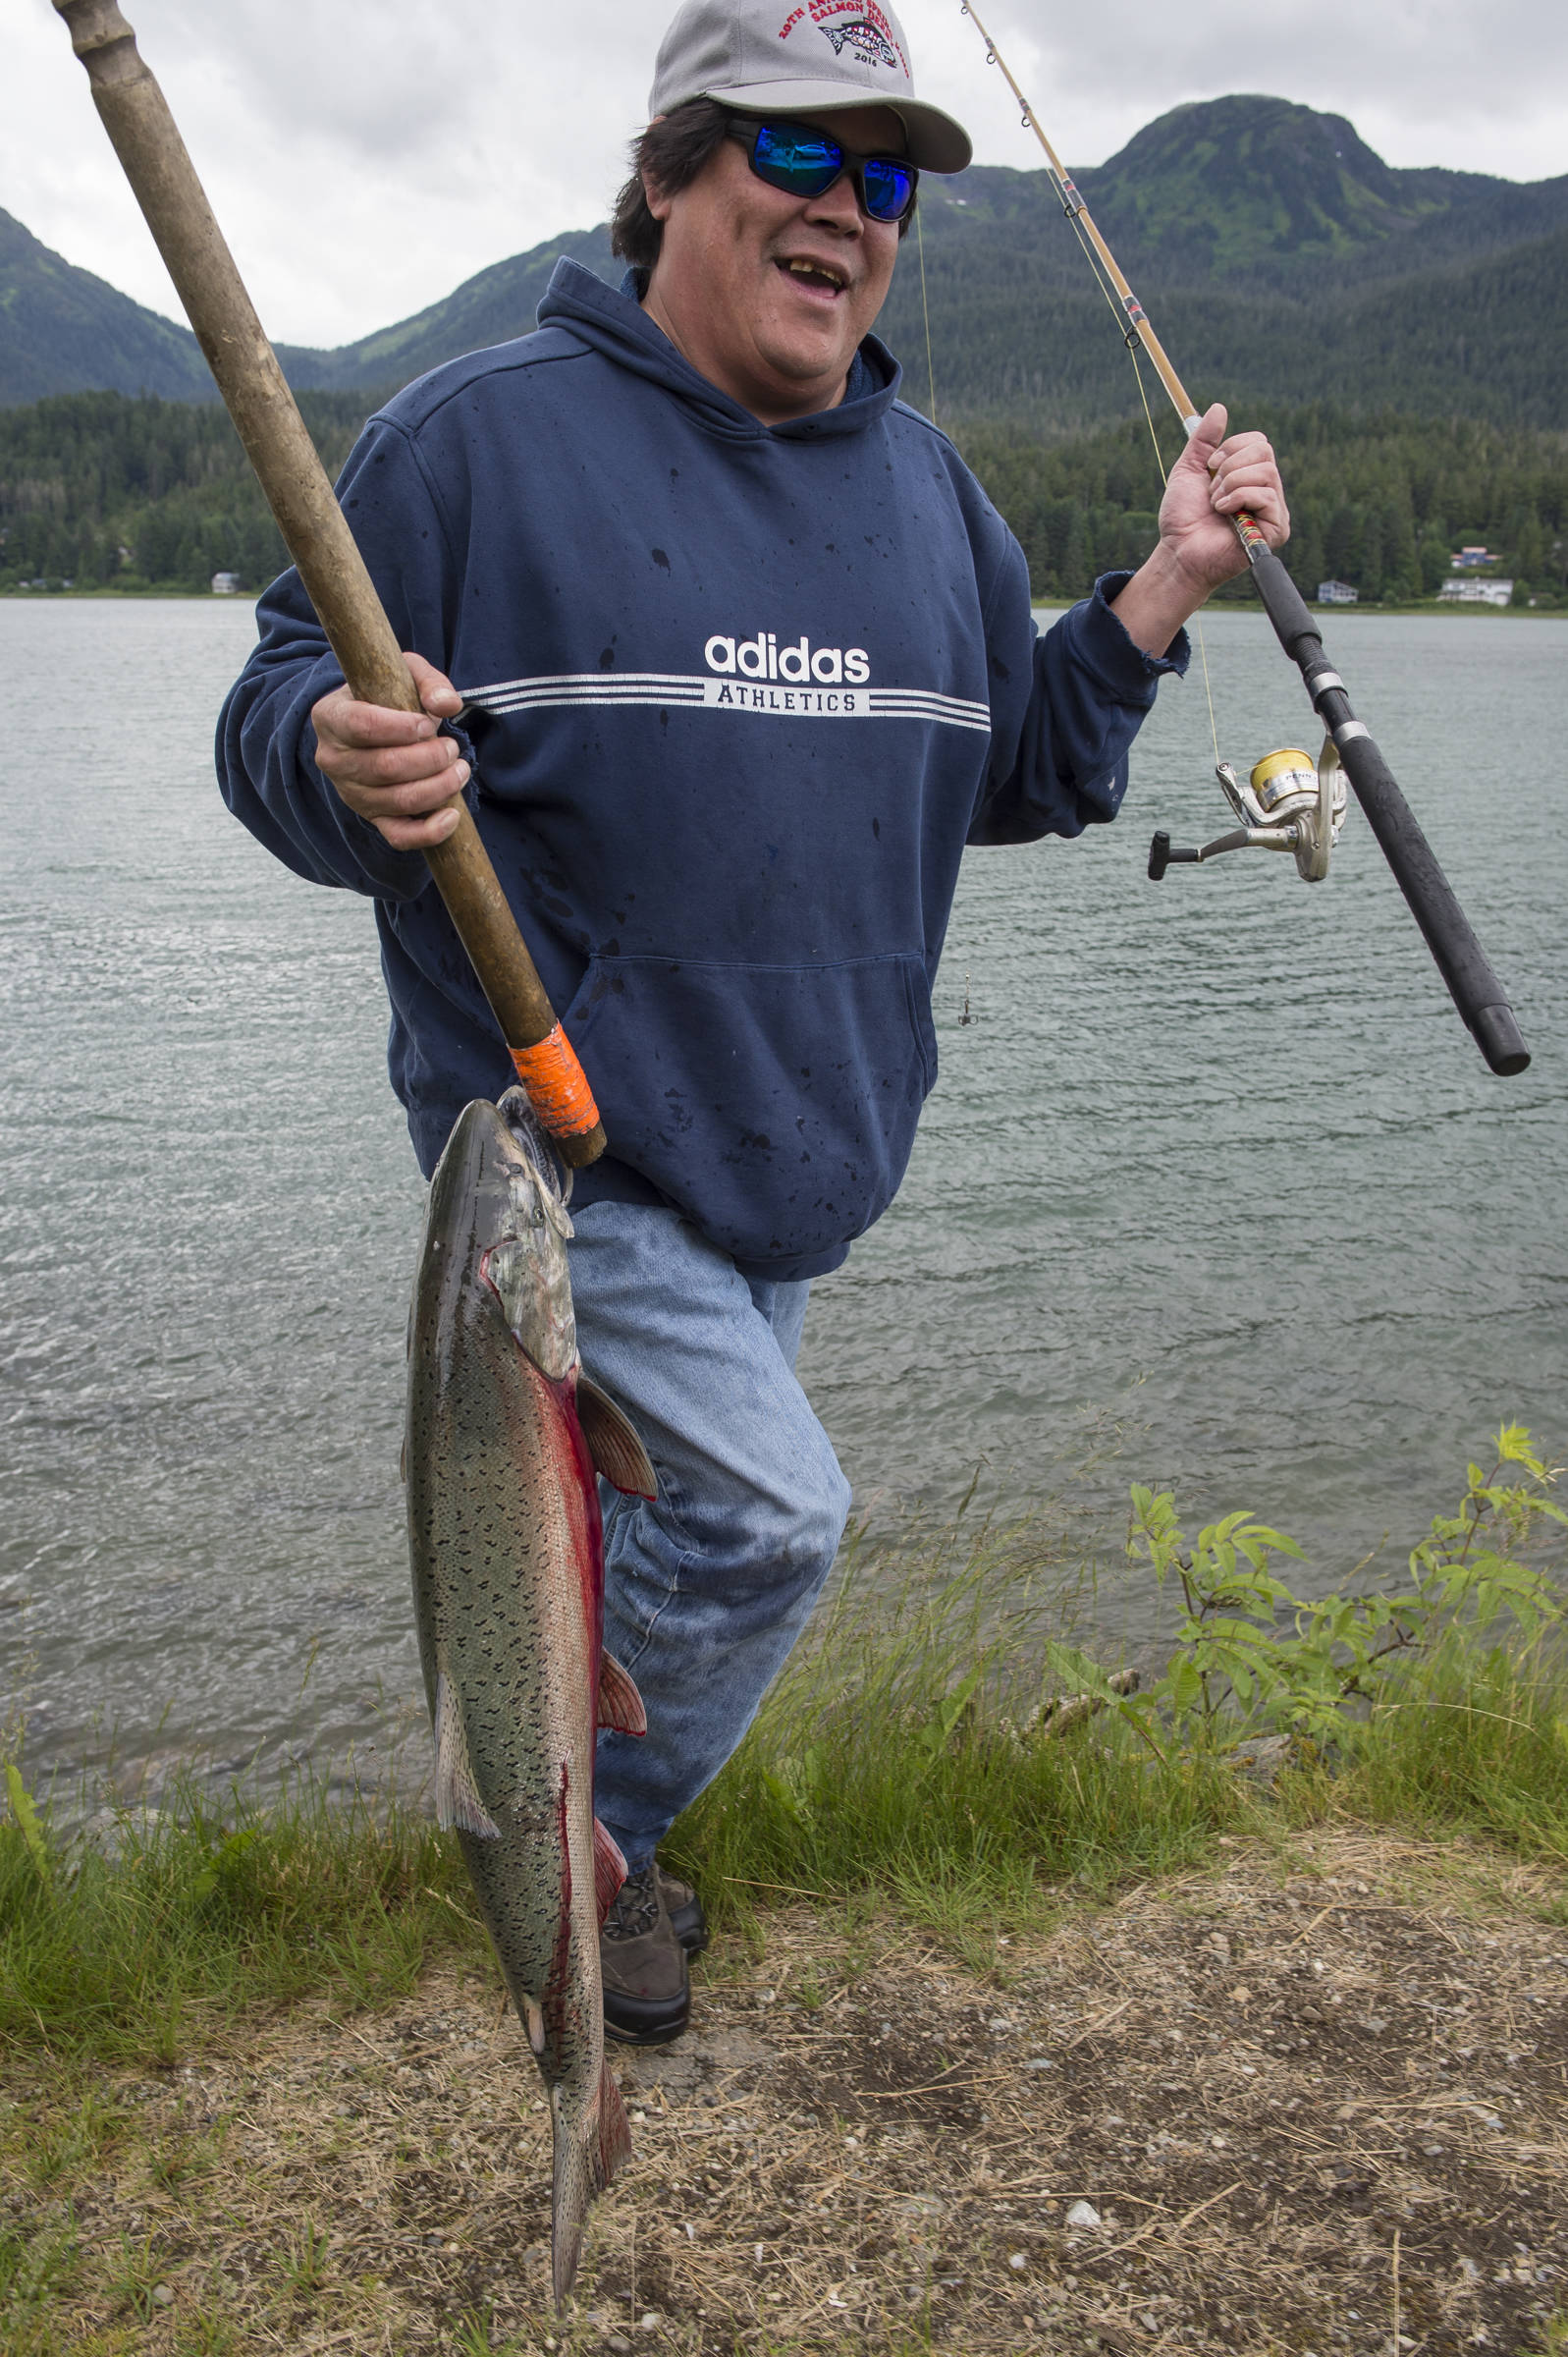 Nick Vonda brings up a king salmon he caught at the Wayside Park on Channel Drive on Tuesday, June 26, 2018. Beginning at 12:01 a.m. Sunday, July 1st, sport fishing for king salmon and snagging will be prohibited from the shoreline to 200 yards offshore between the end of Channel Drive and a point near the Samson Tug and Barge property to ensure that enough king salmon make it up the fish ladder to meet egg-take goals needed for future production. (Michael Penn | Juneau Empire)